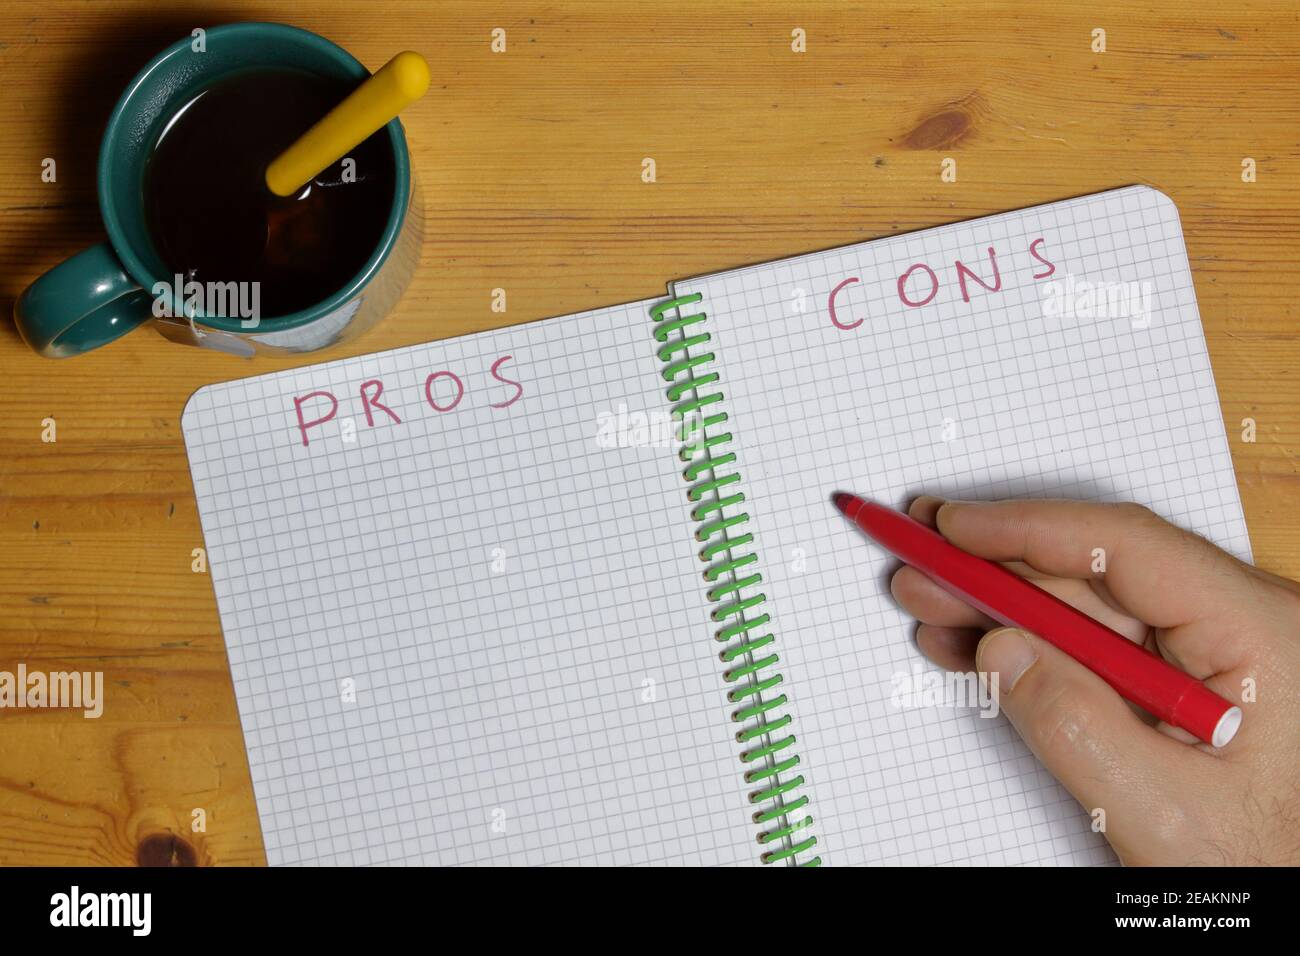 pros cons list in a notebook and man hand with red marker writing Stock Photo